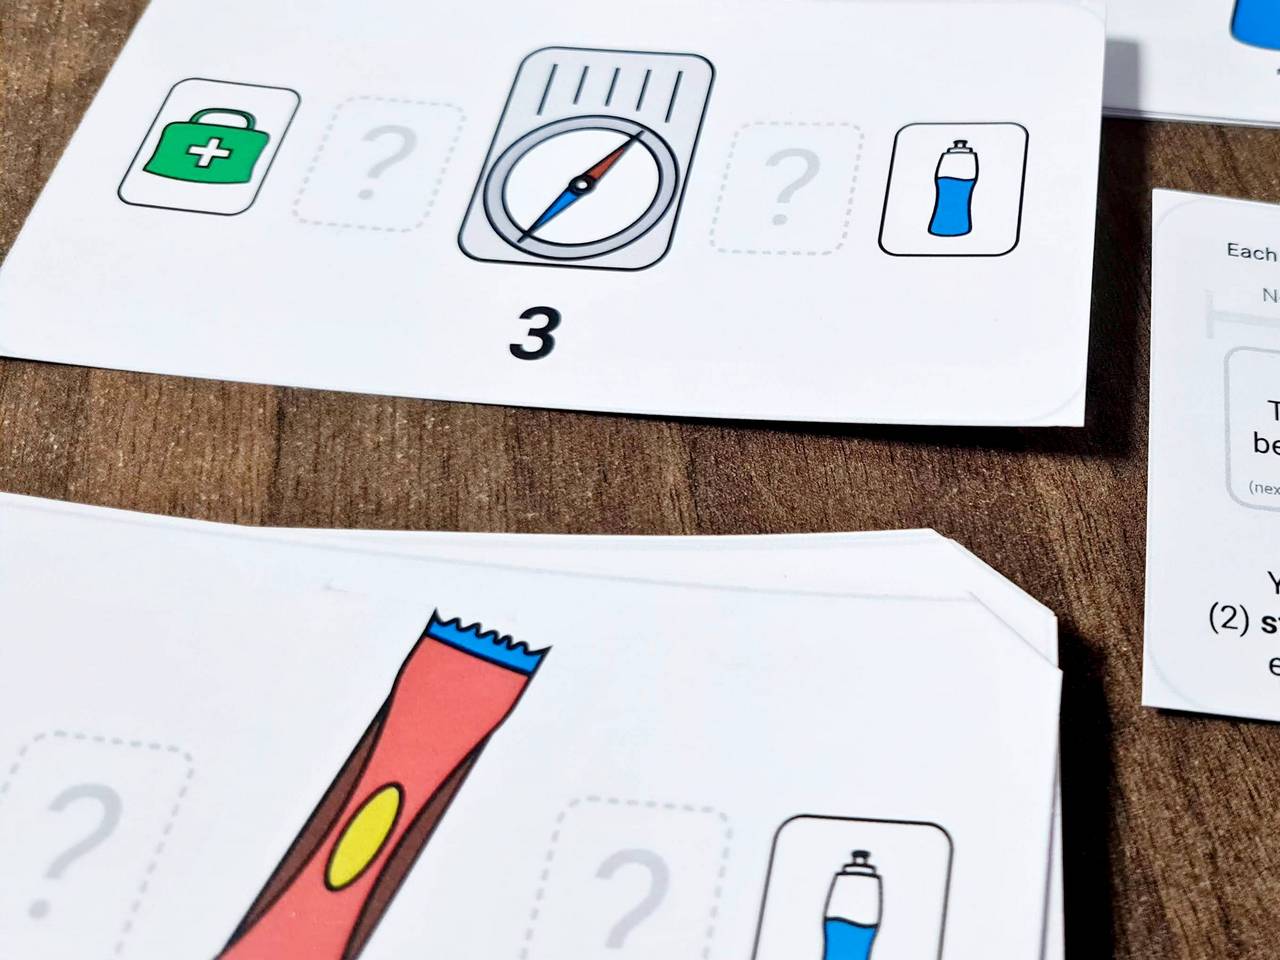 Game cards for Pack it Up, with icons showing a compass, water bottle, and other kit